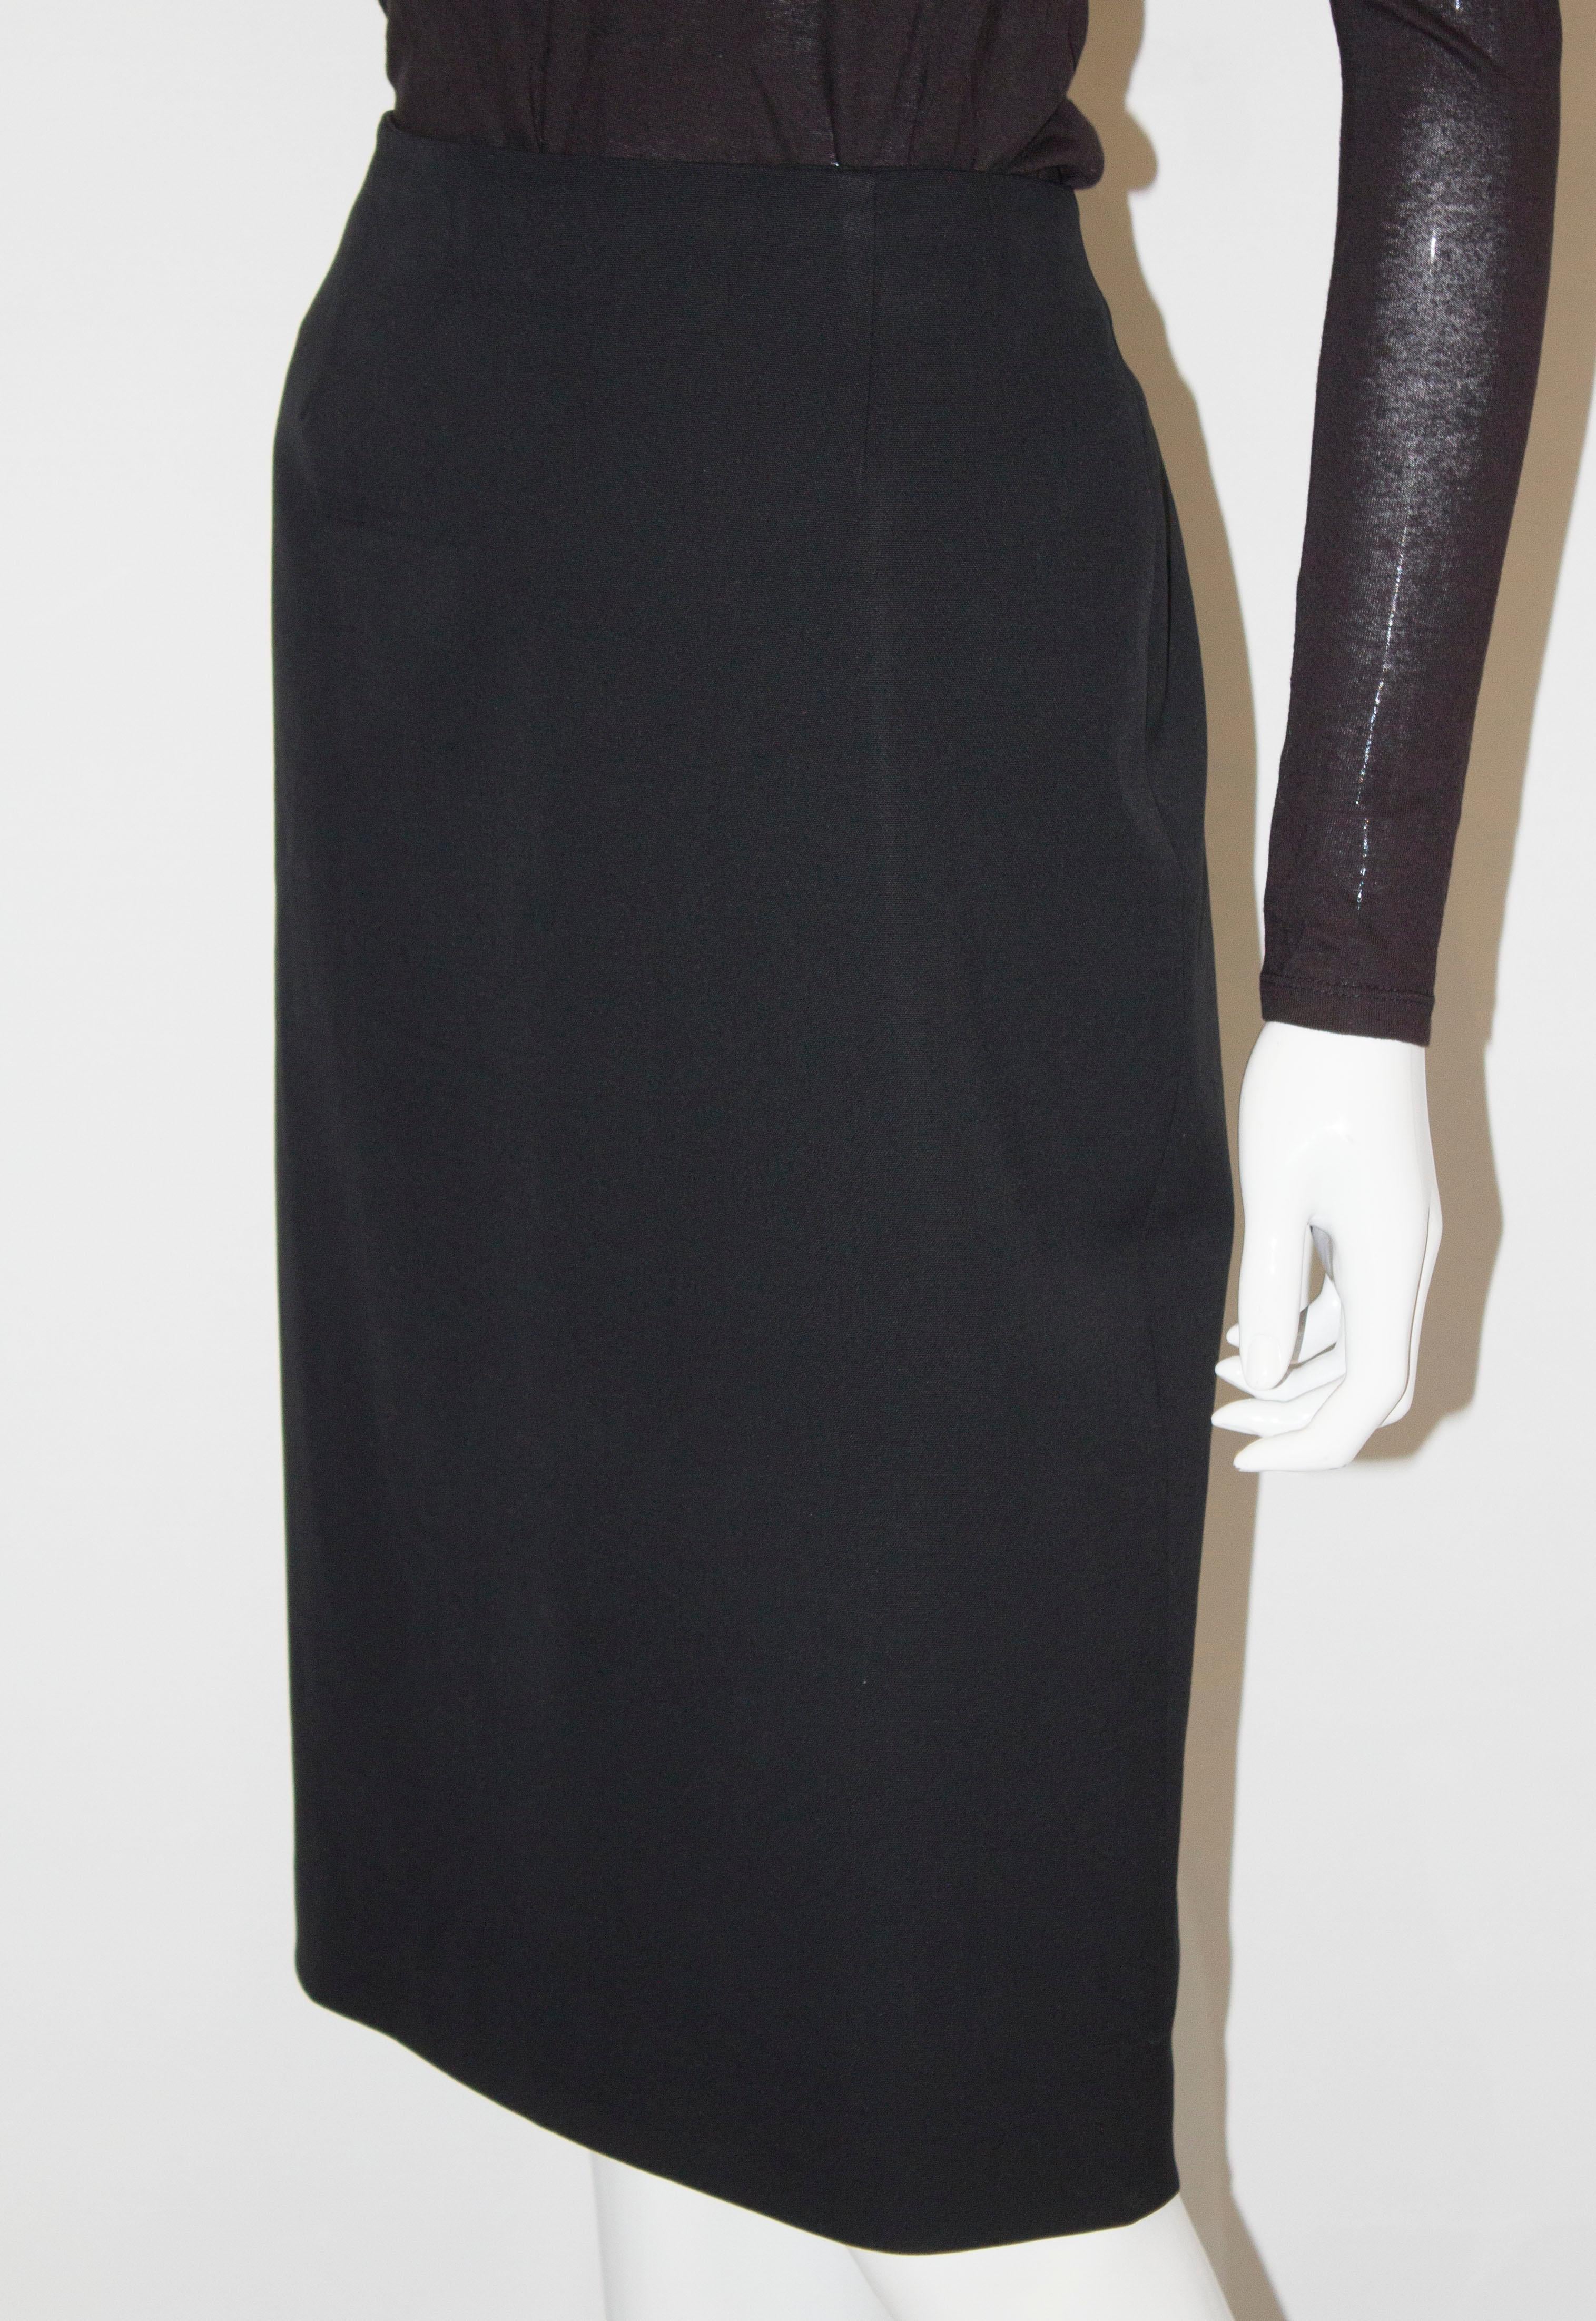 Christian Dior Black Wool Skirt Size 10 In Good Condition For Sale In London, GB